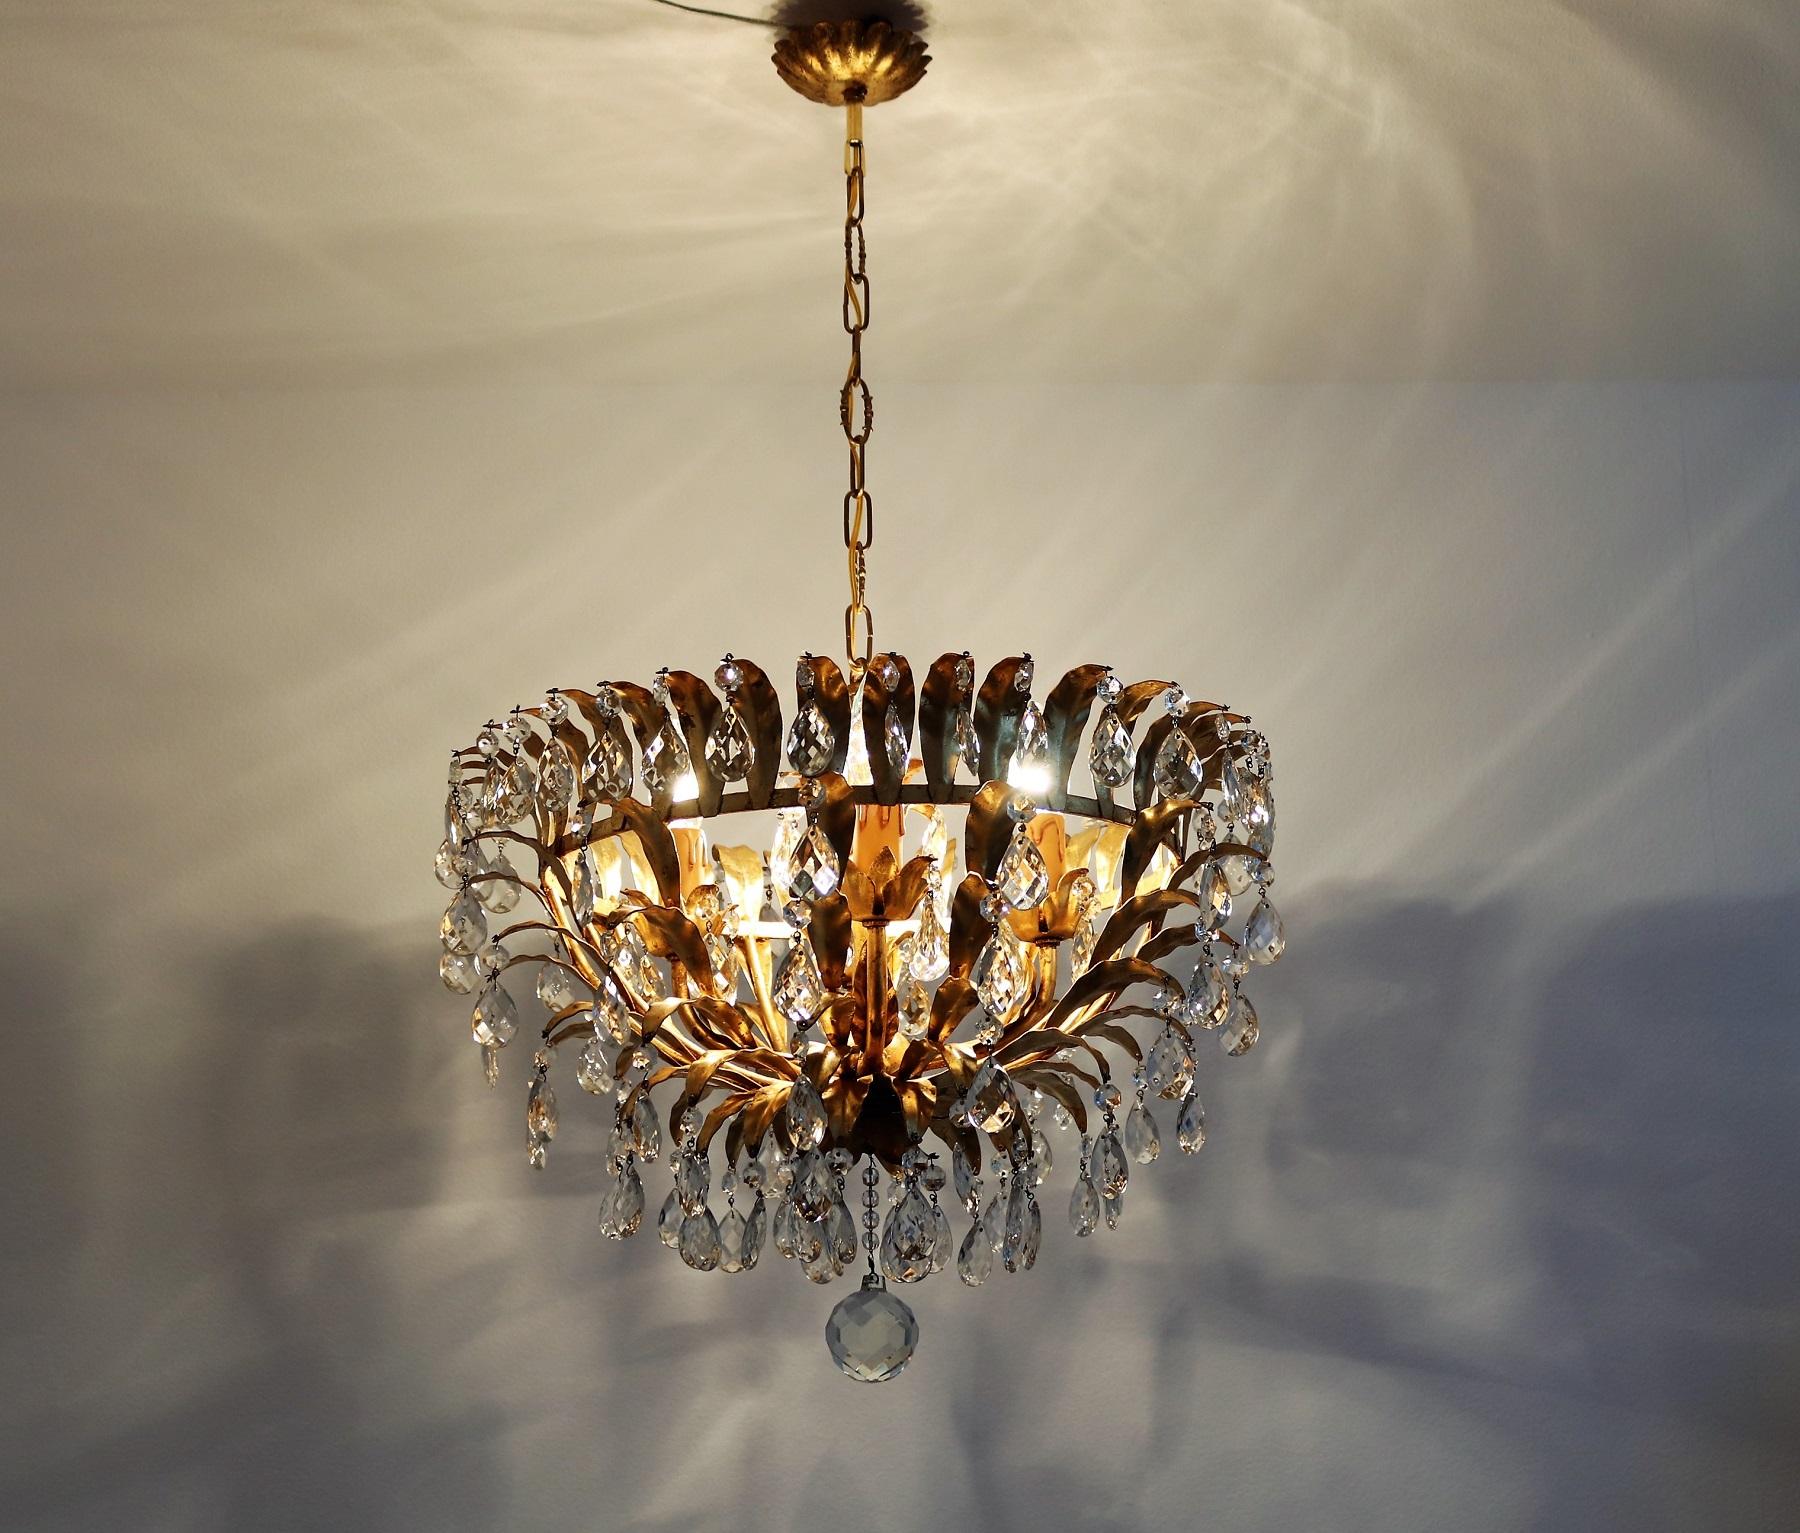 Italian Midcentury Gilt Crystal Flush Mount Chandelier with Leafes by Banci  13